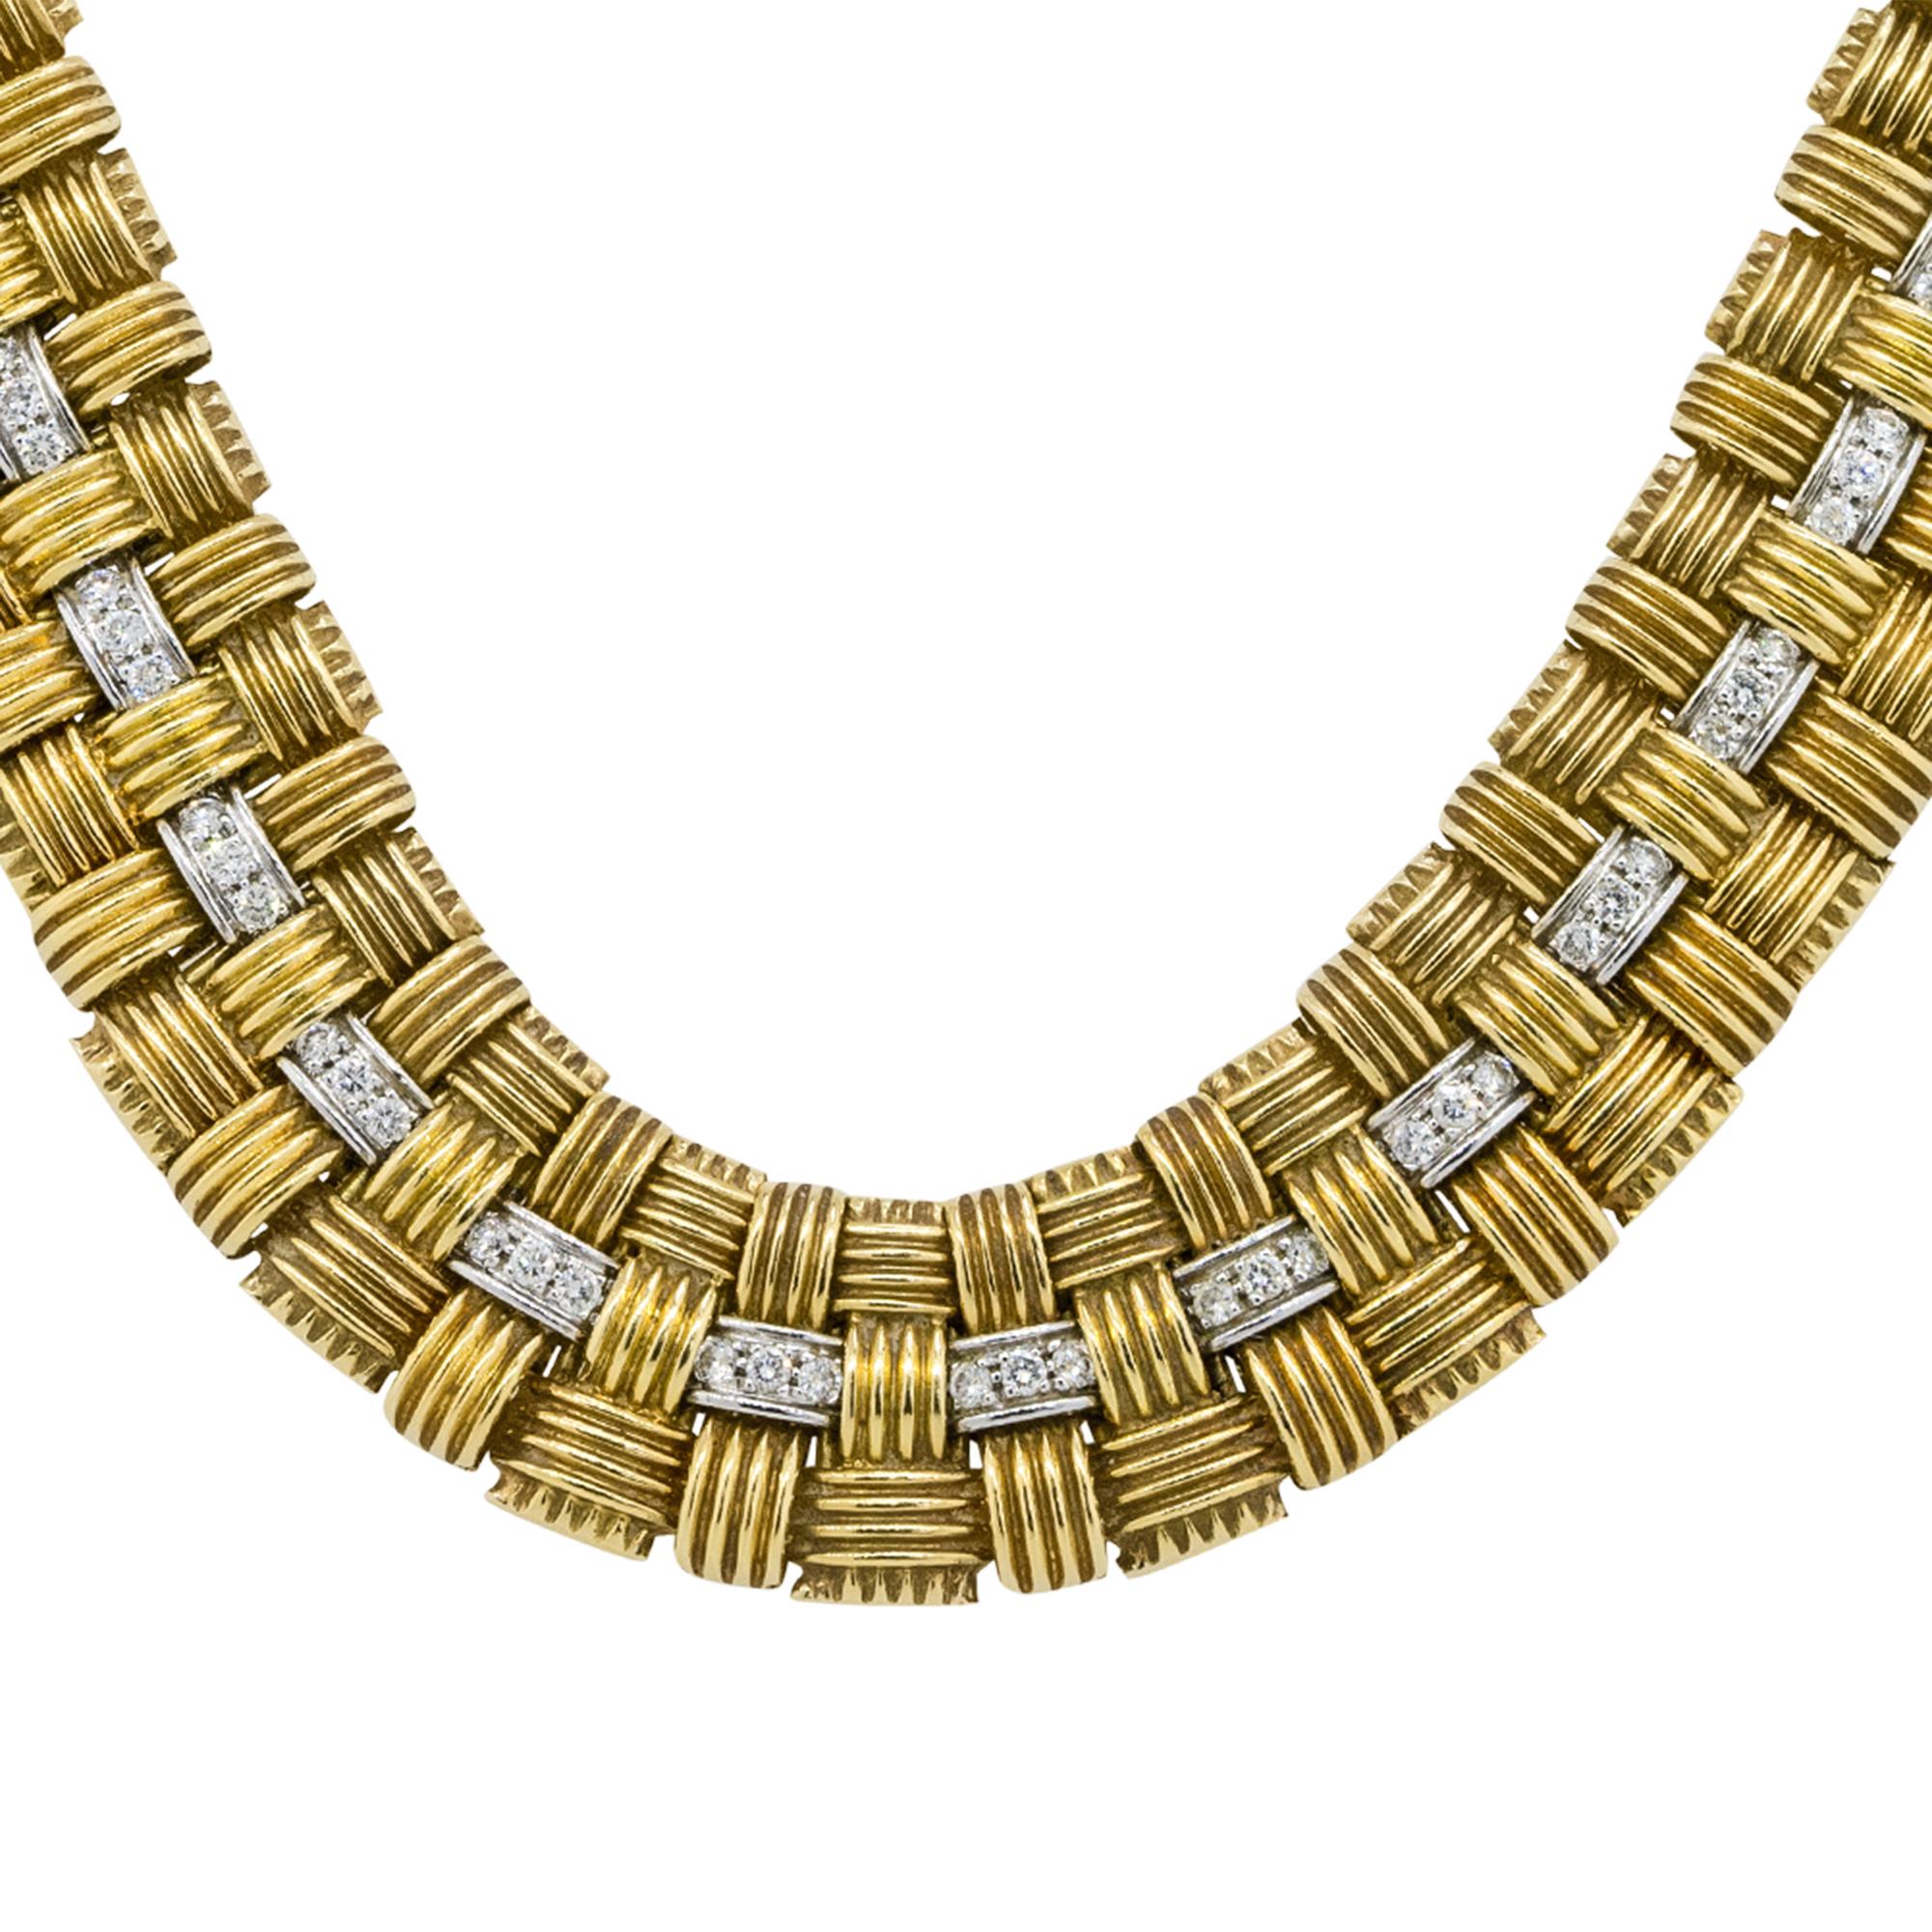 Make: Roberto Coin, Appassionata Necklace
Material: 14k Yellow Gold
Diamond Details: Approx. 33.02ctw of round cut and invisible set baguette Diamonds. Diamonds are G/H in color and VS in clarity.
Measurements: Necklace measures 17